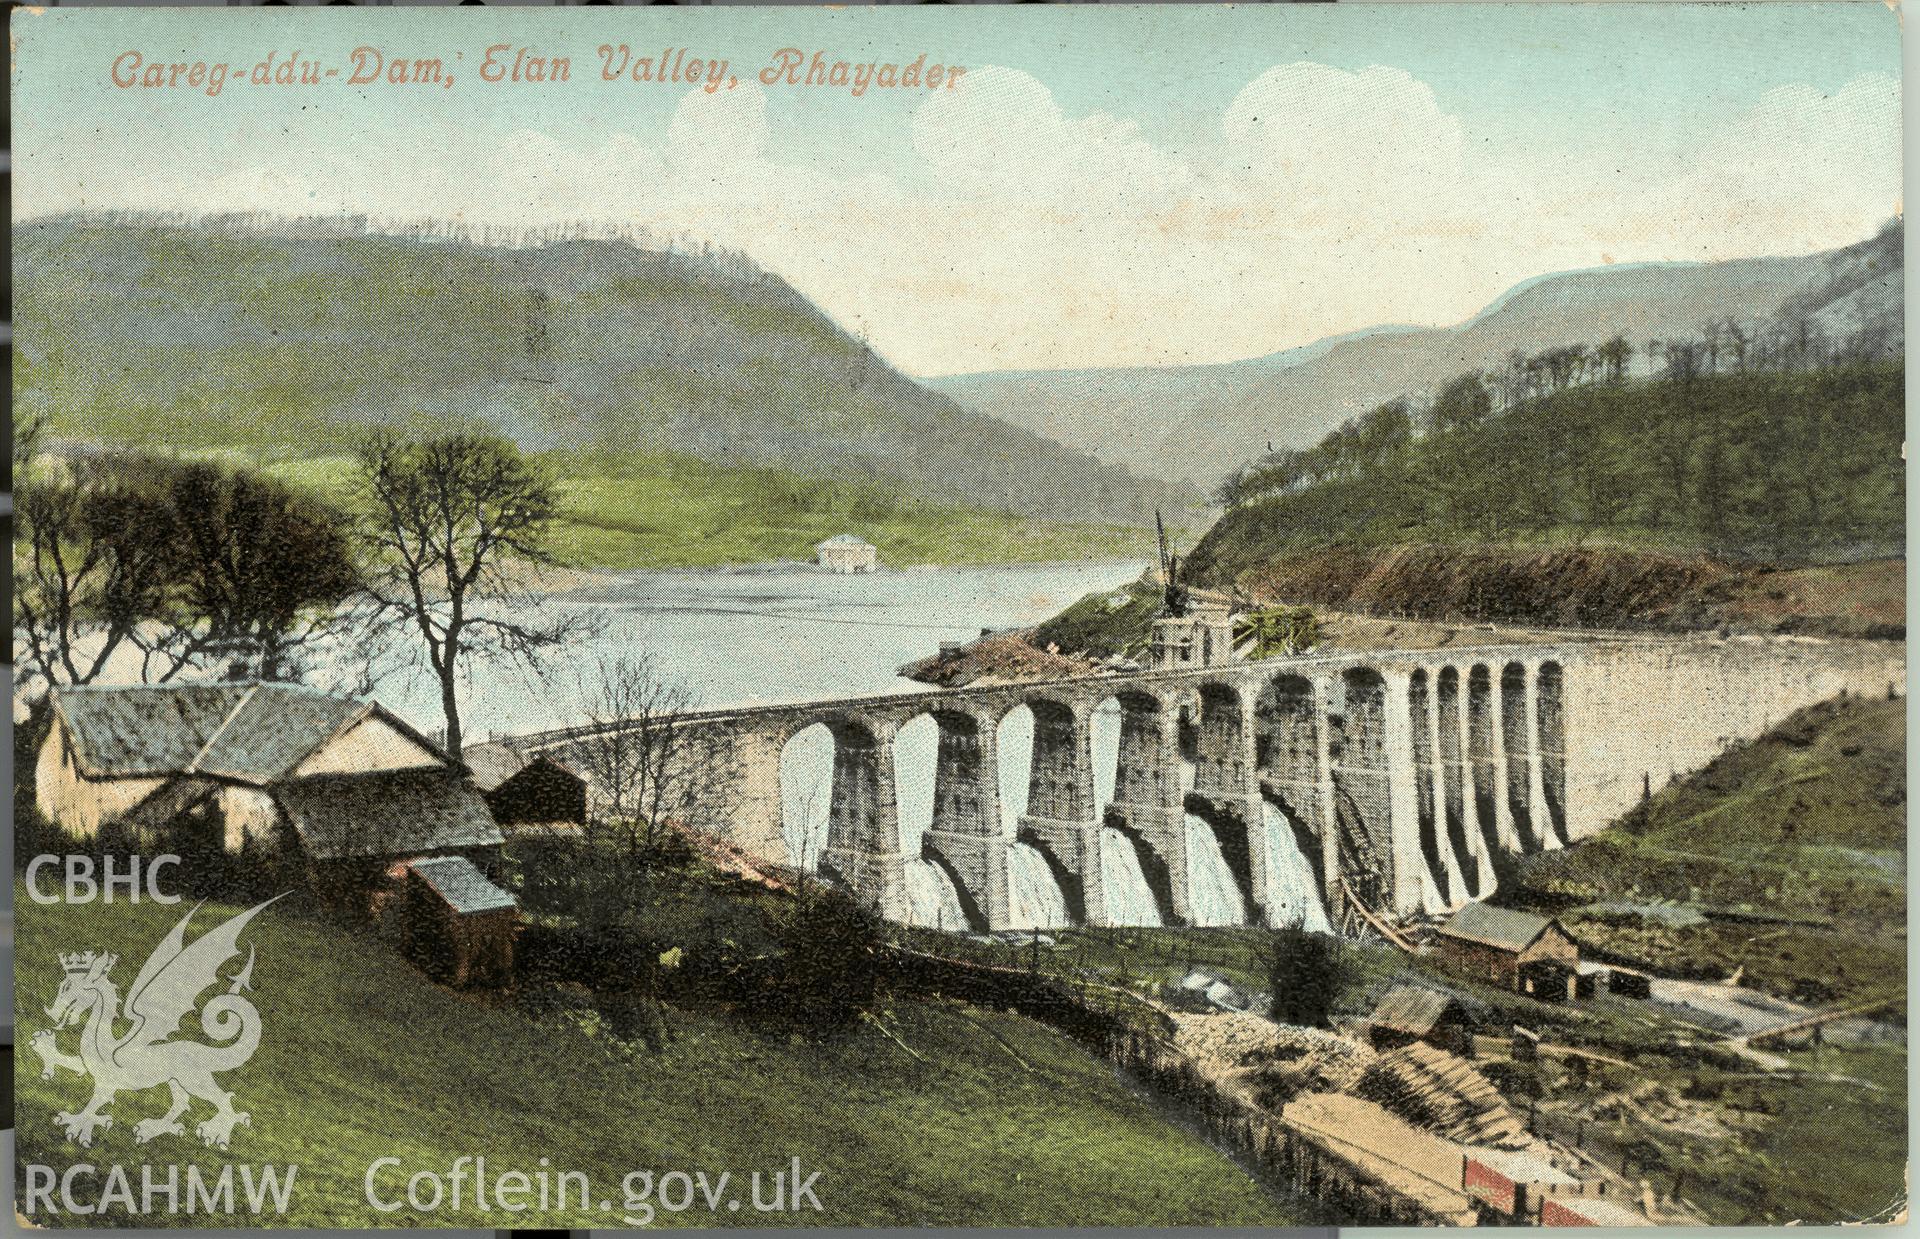 Digitised postcard image of Carreg Ddu Dam, Elan valley, Rhayader, J. Roberts, Chemist, Rhayader. Produced by Parks and Gardens Data Services, from an original item in the Peter Davis Collection at Parks and Gardens UK. We hold only web-resolution images of this collection, suitable for viewing on screen and for research purposes only. We do not hold the original images, or publication quality scans.